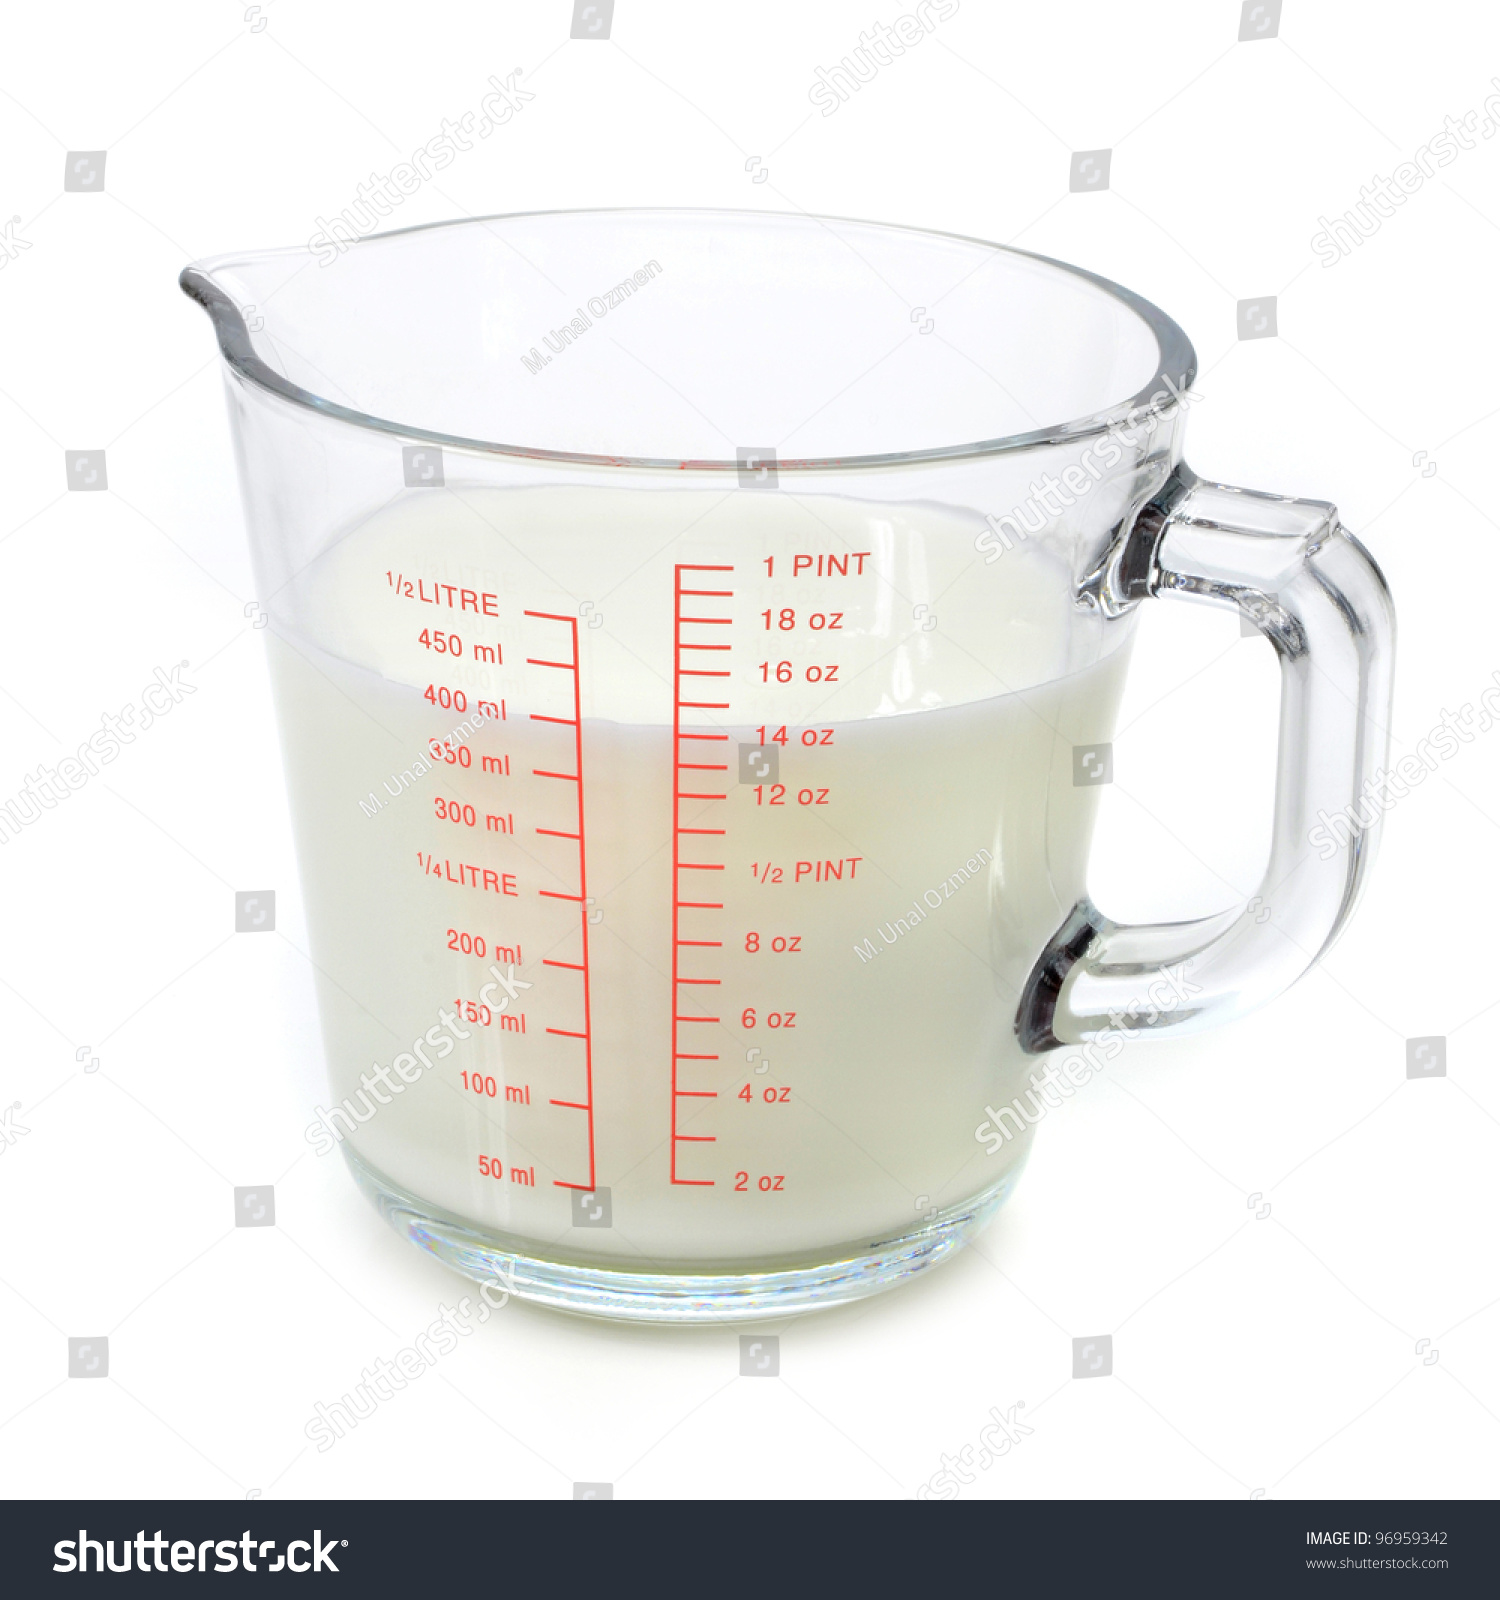 Milk Measuring Cup On White Background Food And Drink Stock Image 96959342,How To Cook Pork Loin Chops